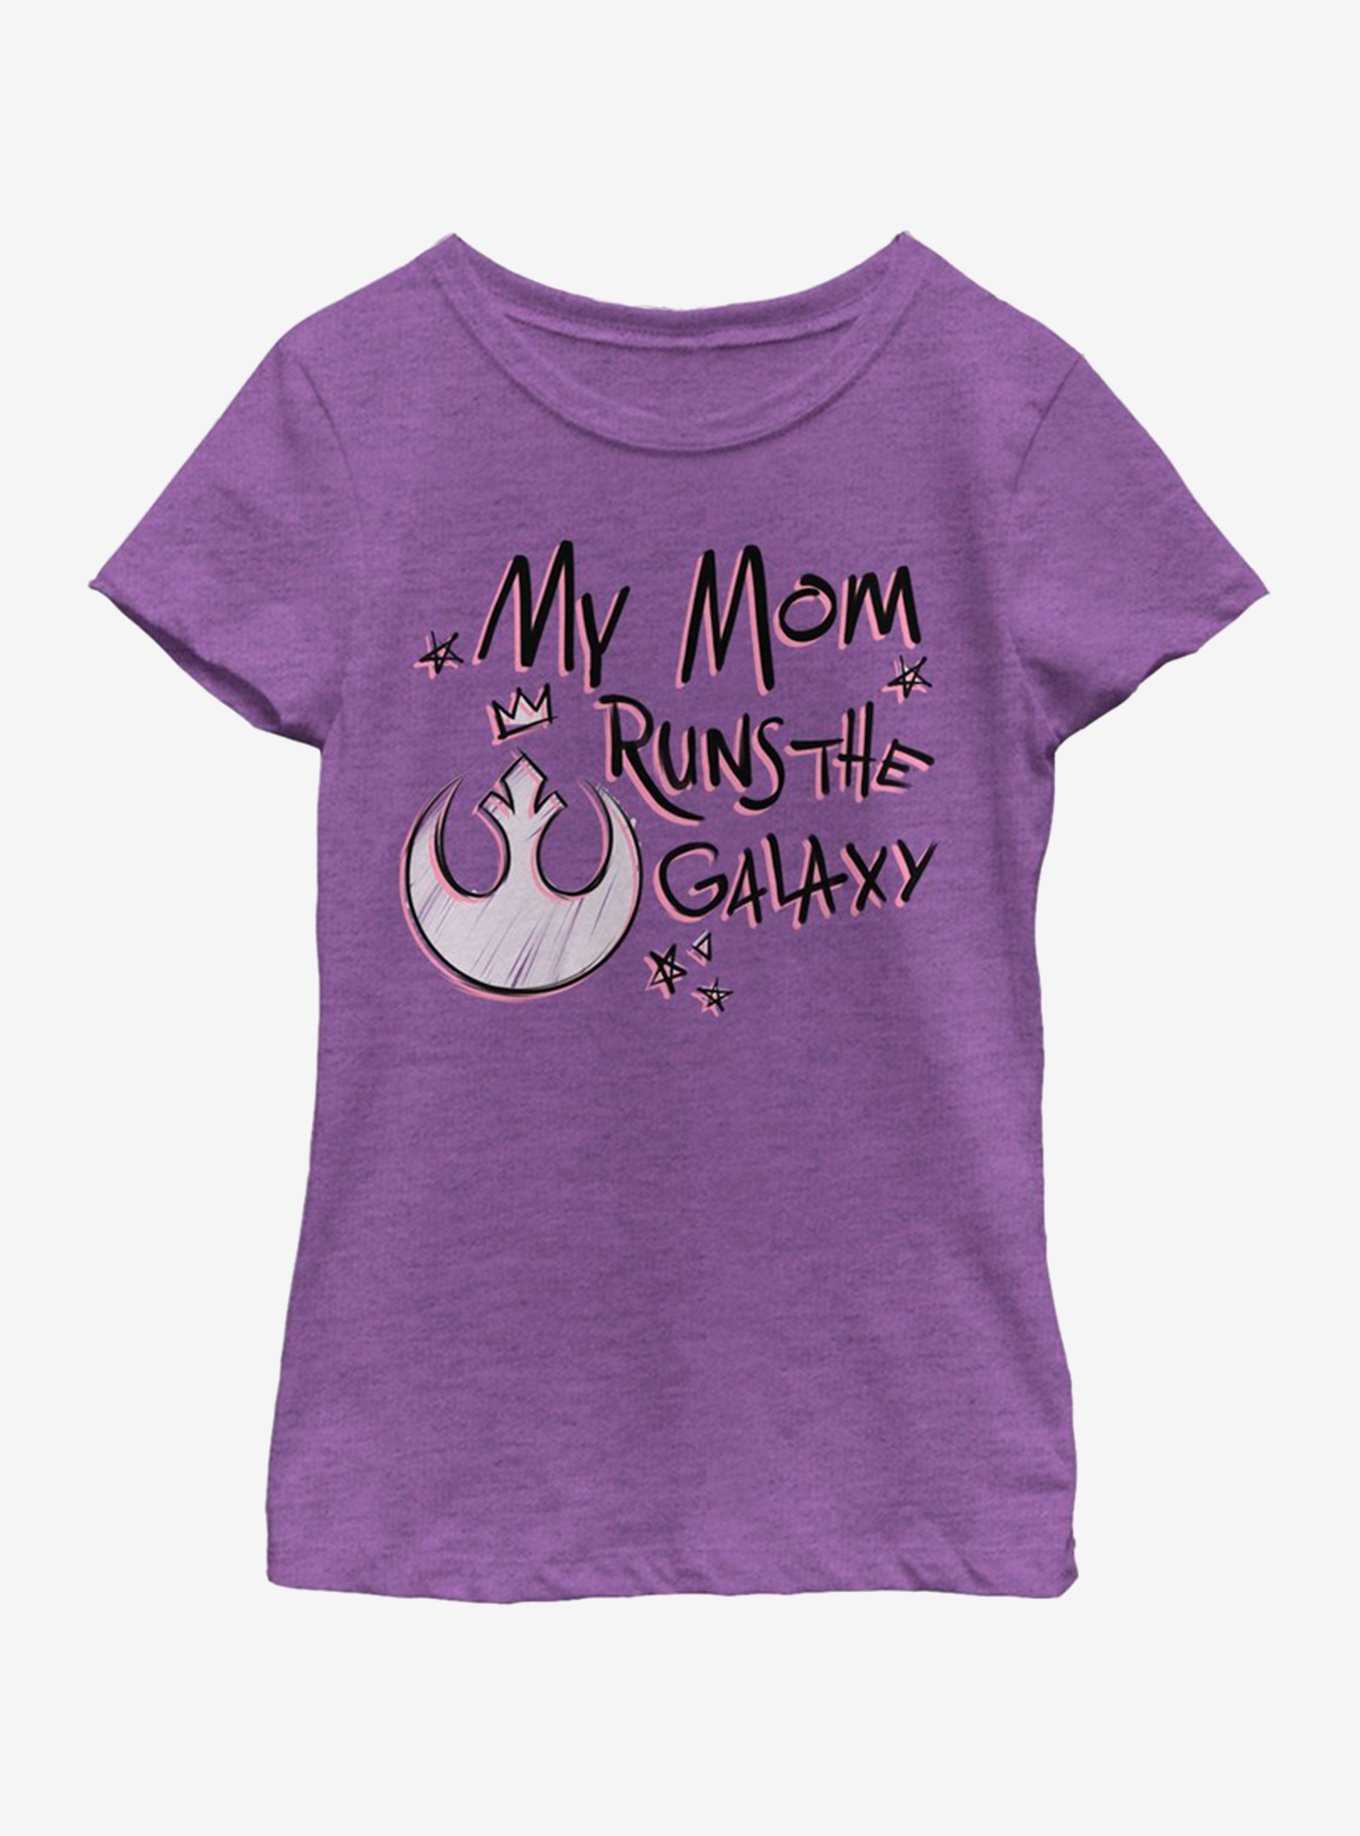 Star Wars This Mom Rules Youth Girls T-Shirt, , hi-res